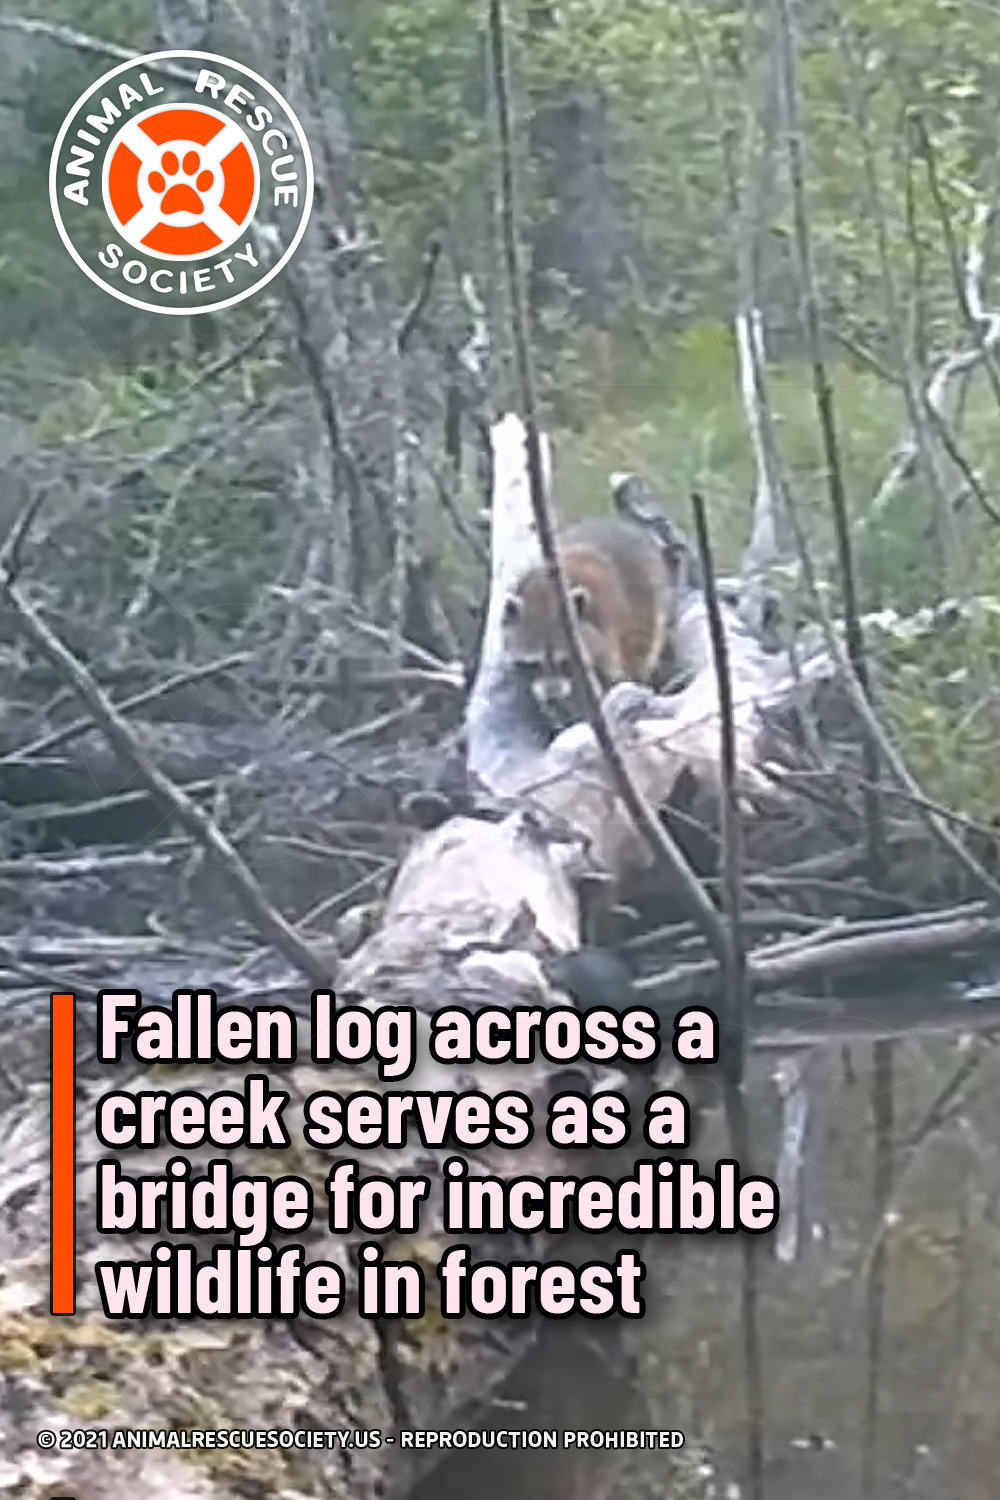 Fallen log across a creek serves as a bridge for incredible wildlife in forest